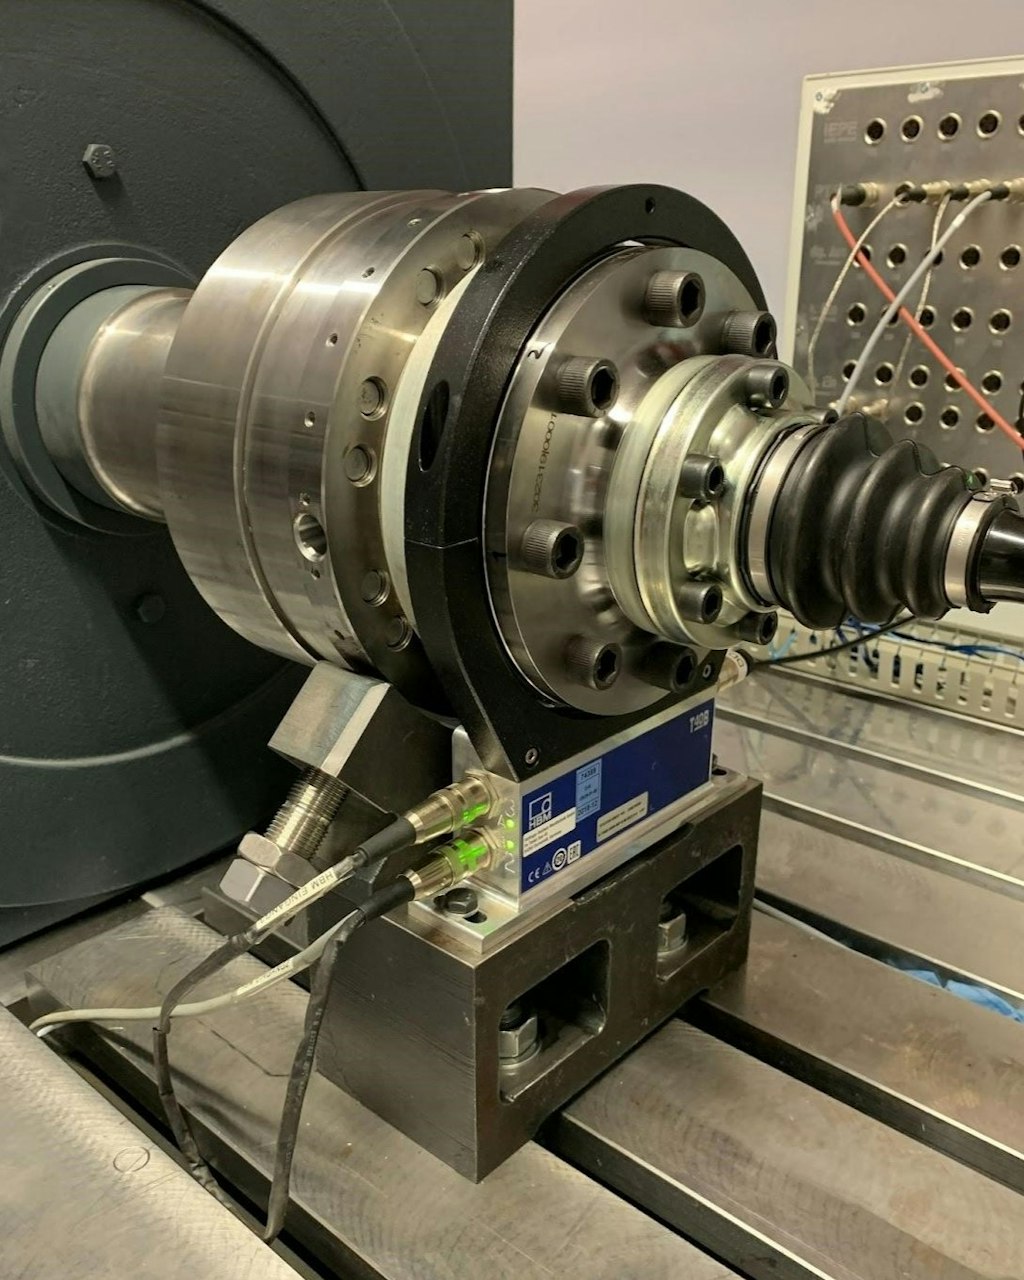 Figure 6. The HBK T40 torque sensors on the test bed.